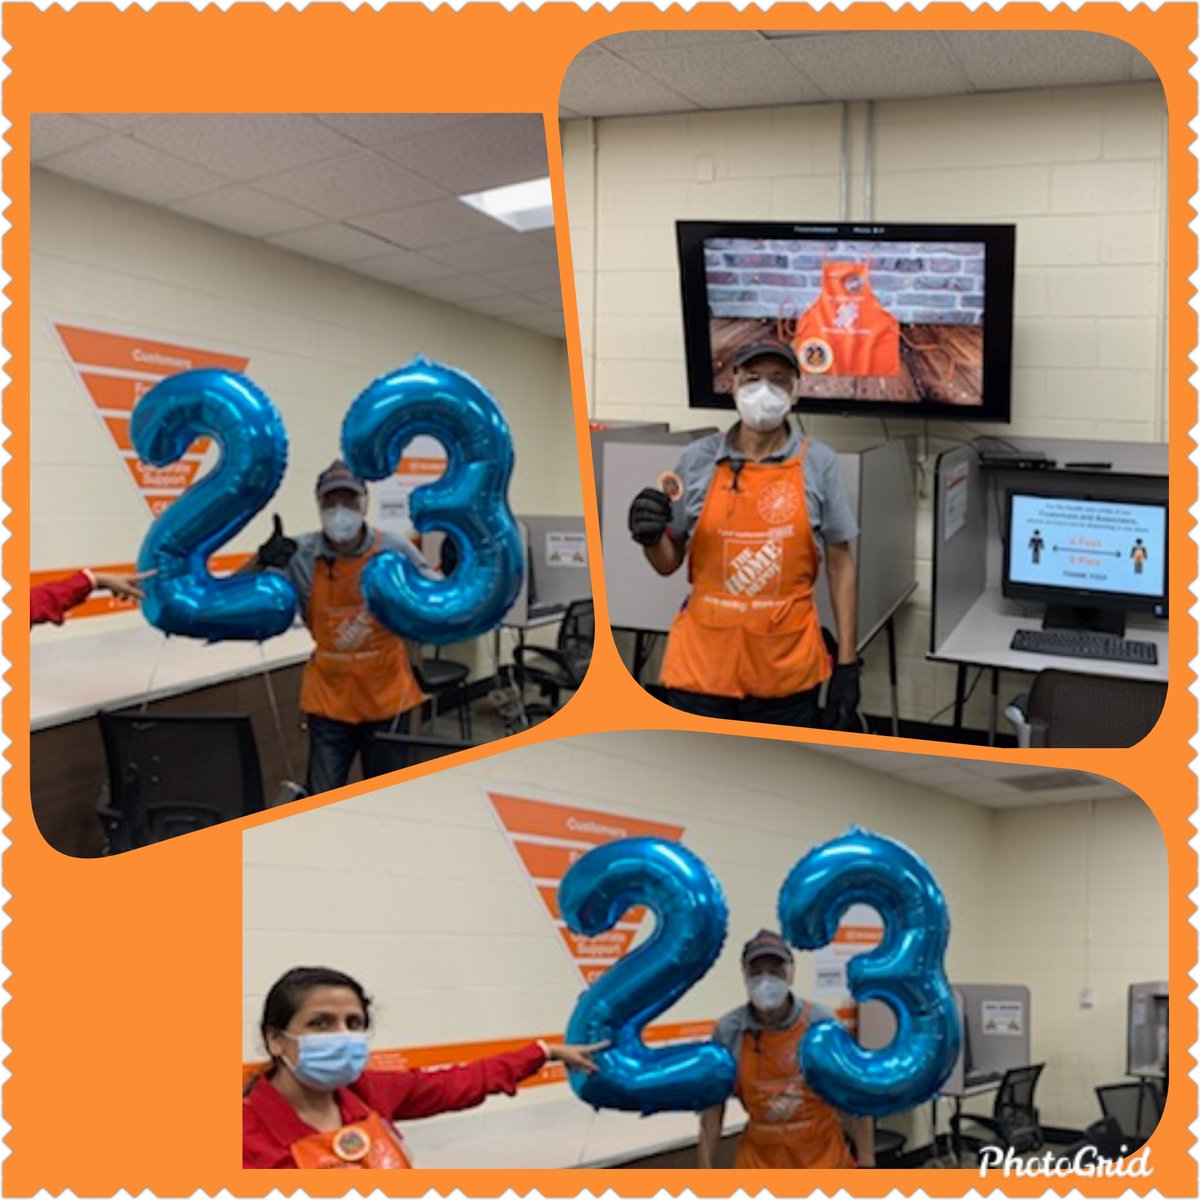 Congratulations Hikmat on 23 years with the Home Depot.  #theMightyMerrifield is honored to have you! #orangeproud #StrongerTogether @RMoutranTHD @navruprai @PaulDeveno @DWRHRD_MA @CollazoH @JDorseyTHD